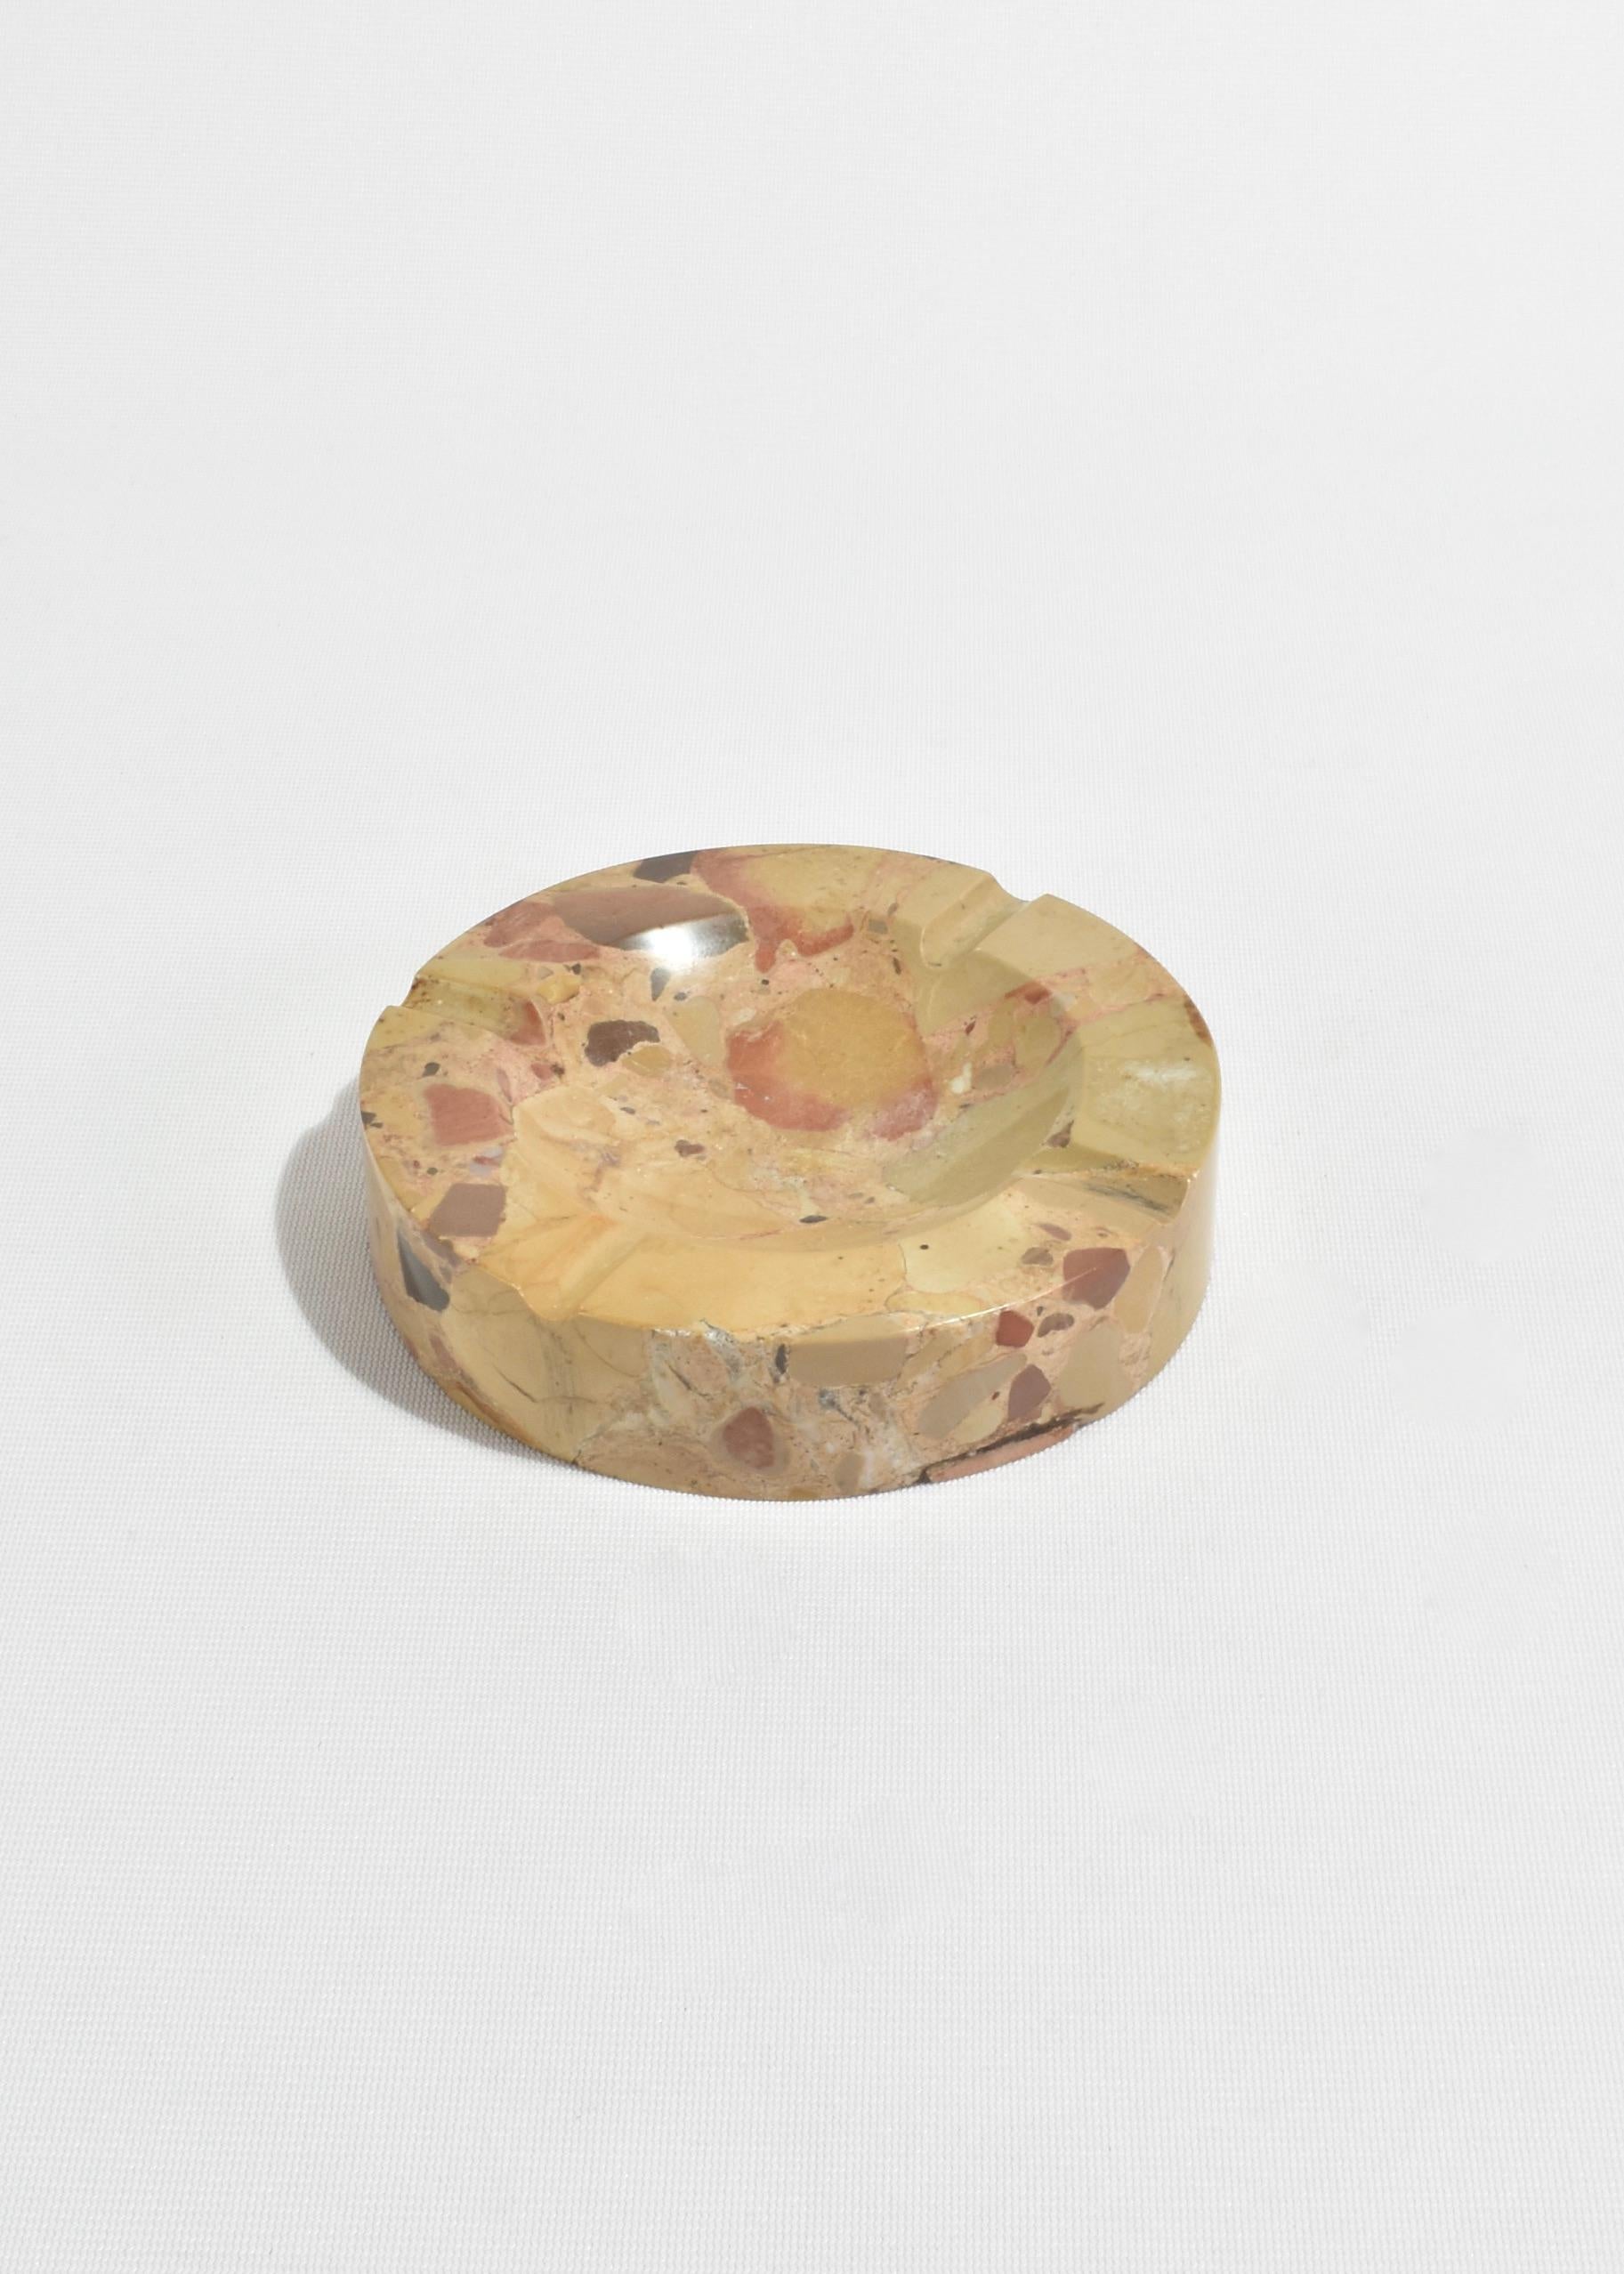 Beautiful marble catchall or ashtray in beige with spotted detail. Perfect for jewelry keeping, part of a table scape or a catchall for small treasures. Ca. 1970s.